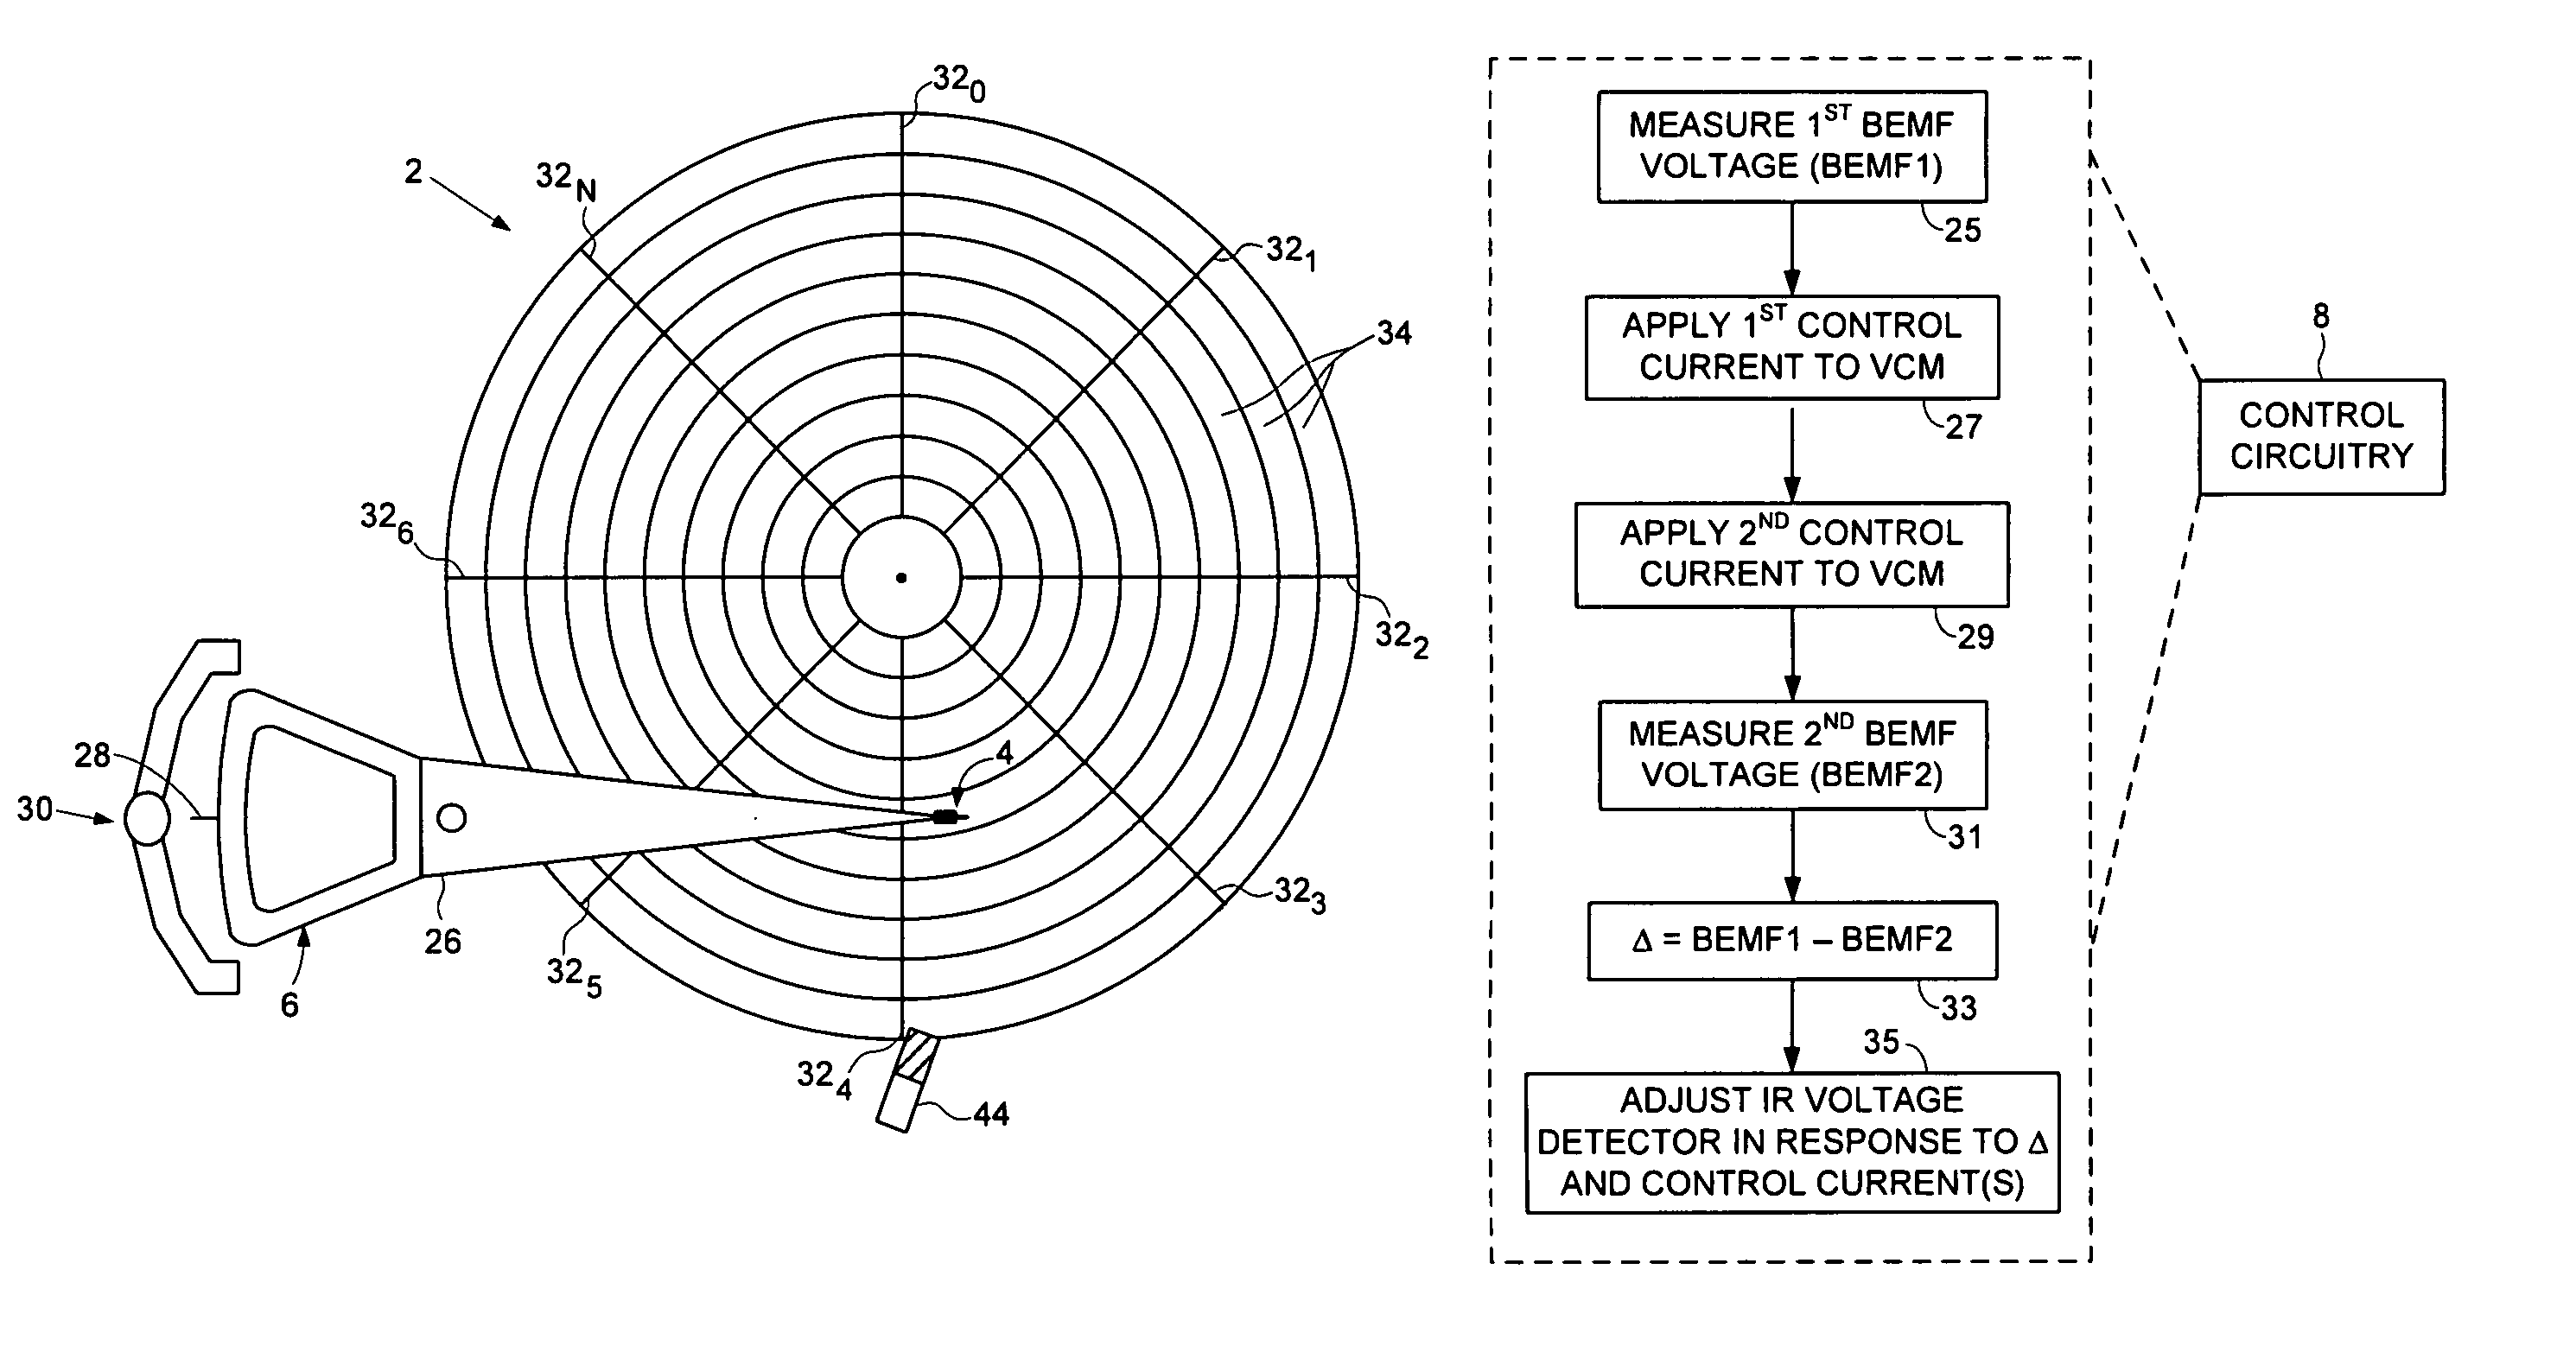 Disk drive updating estimate of voice coil resistance to account for resistance change prior to unload operation